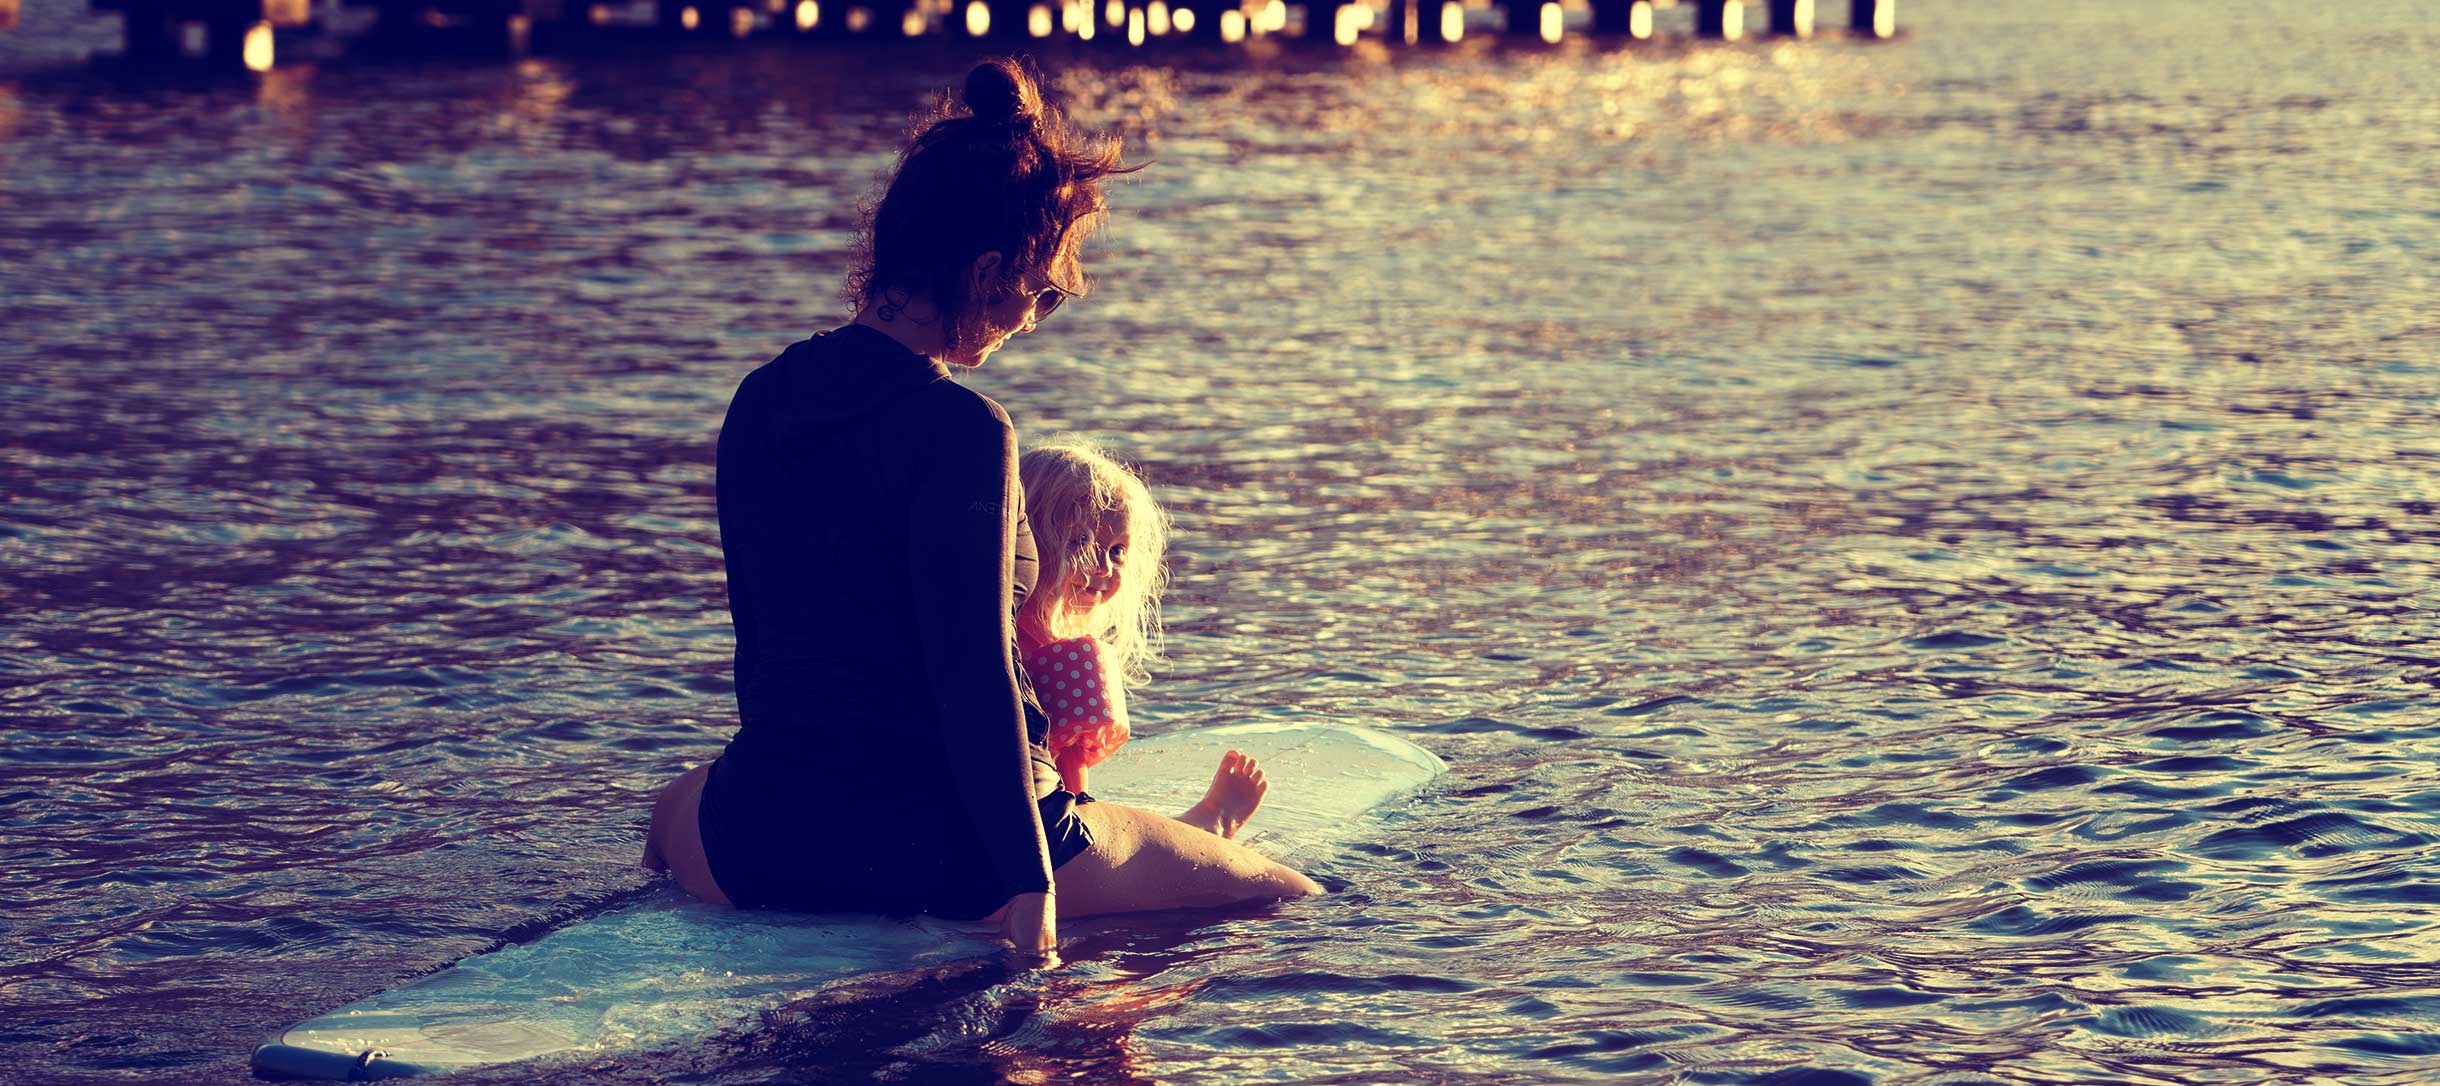 Milk x Whiskey - A mother and her daughter on a surfboard while on an adventure with the family. Sunset.